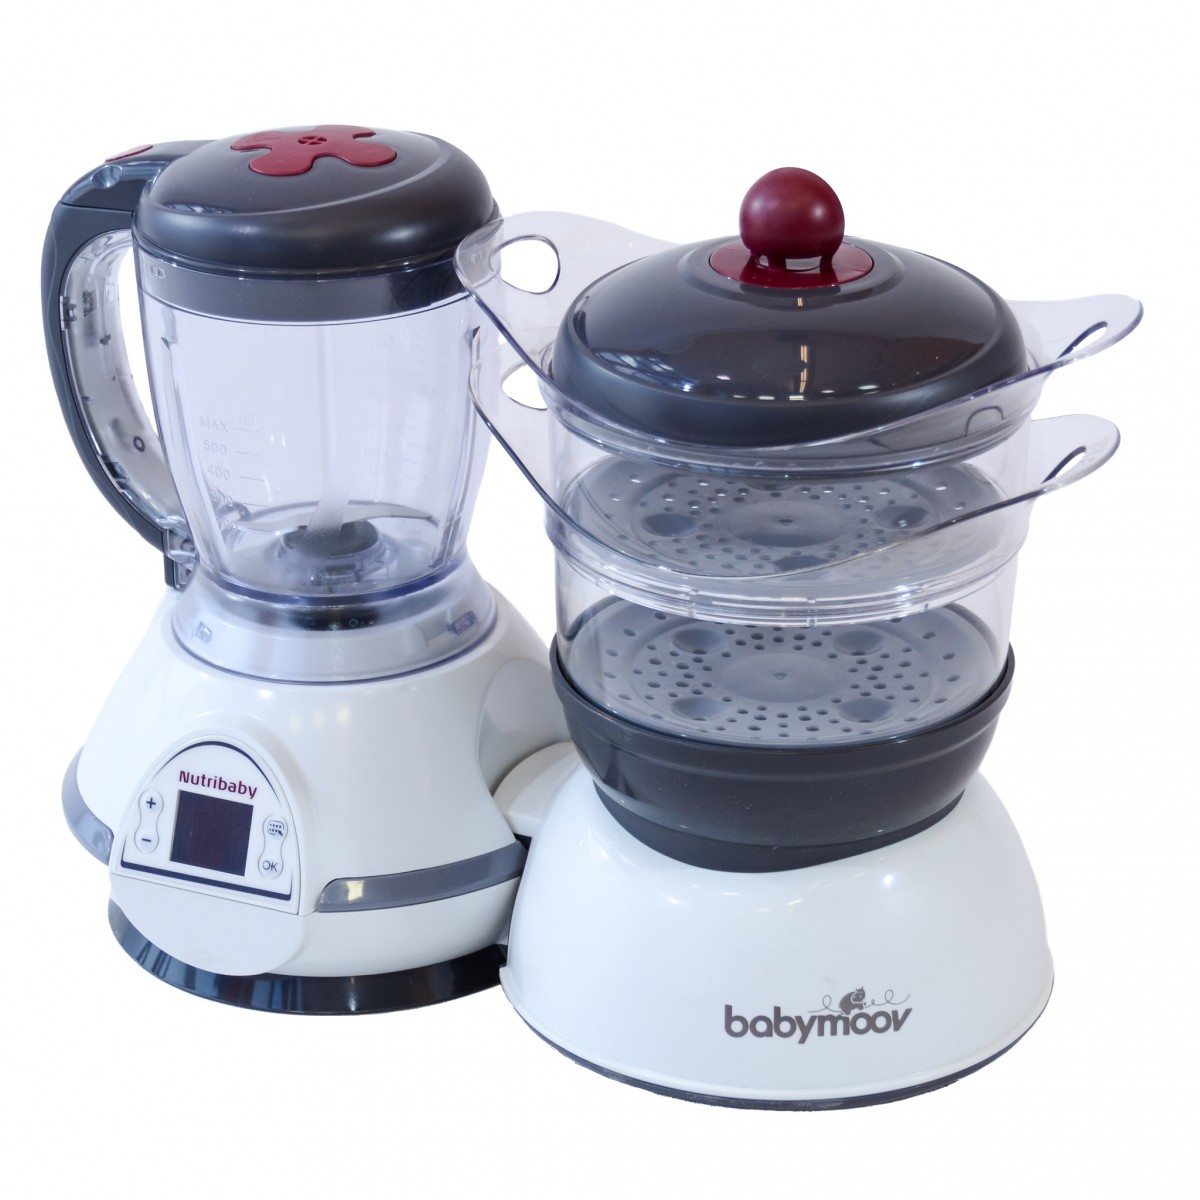 babymoov nutribaby baby food maker review